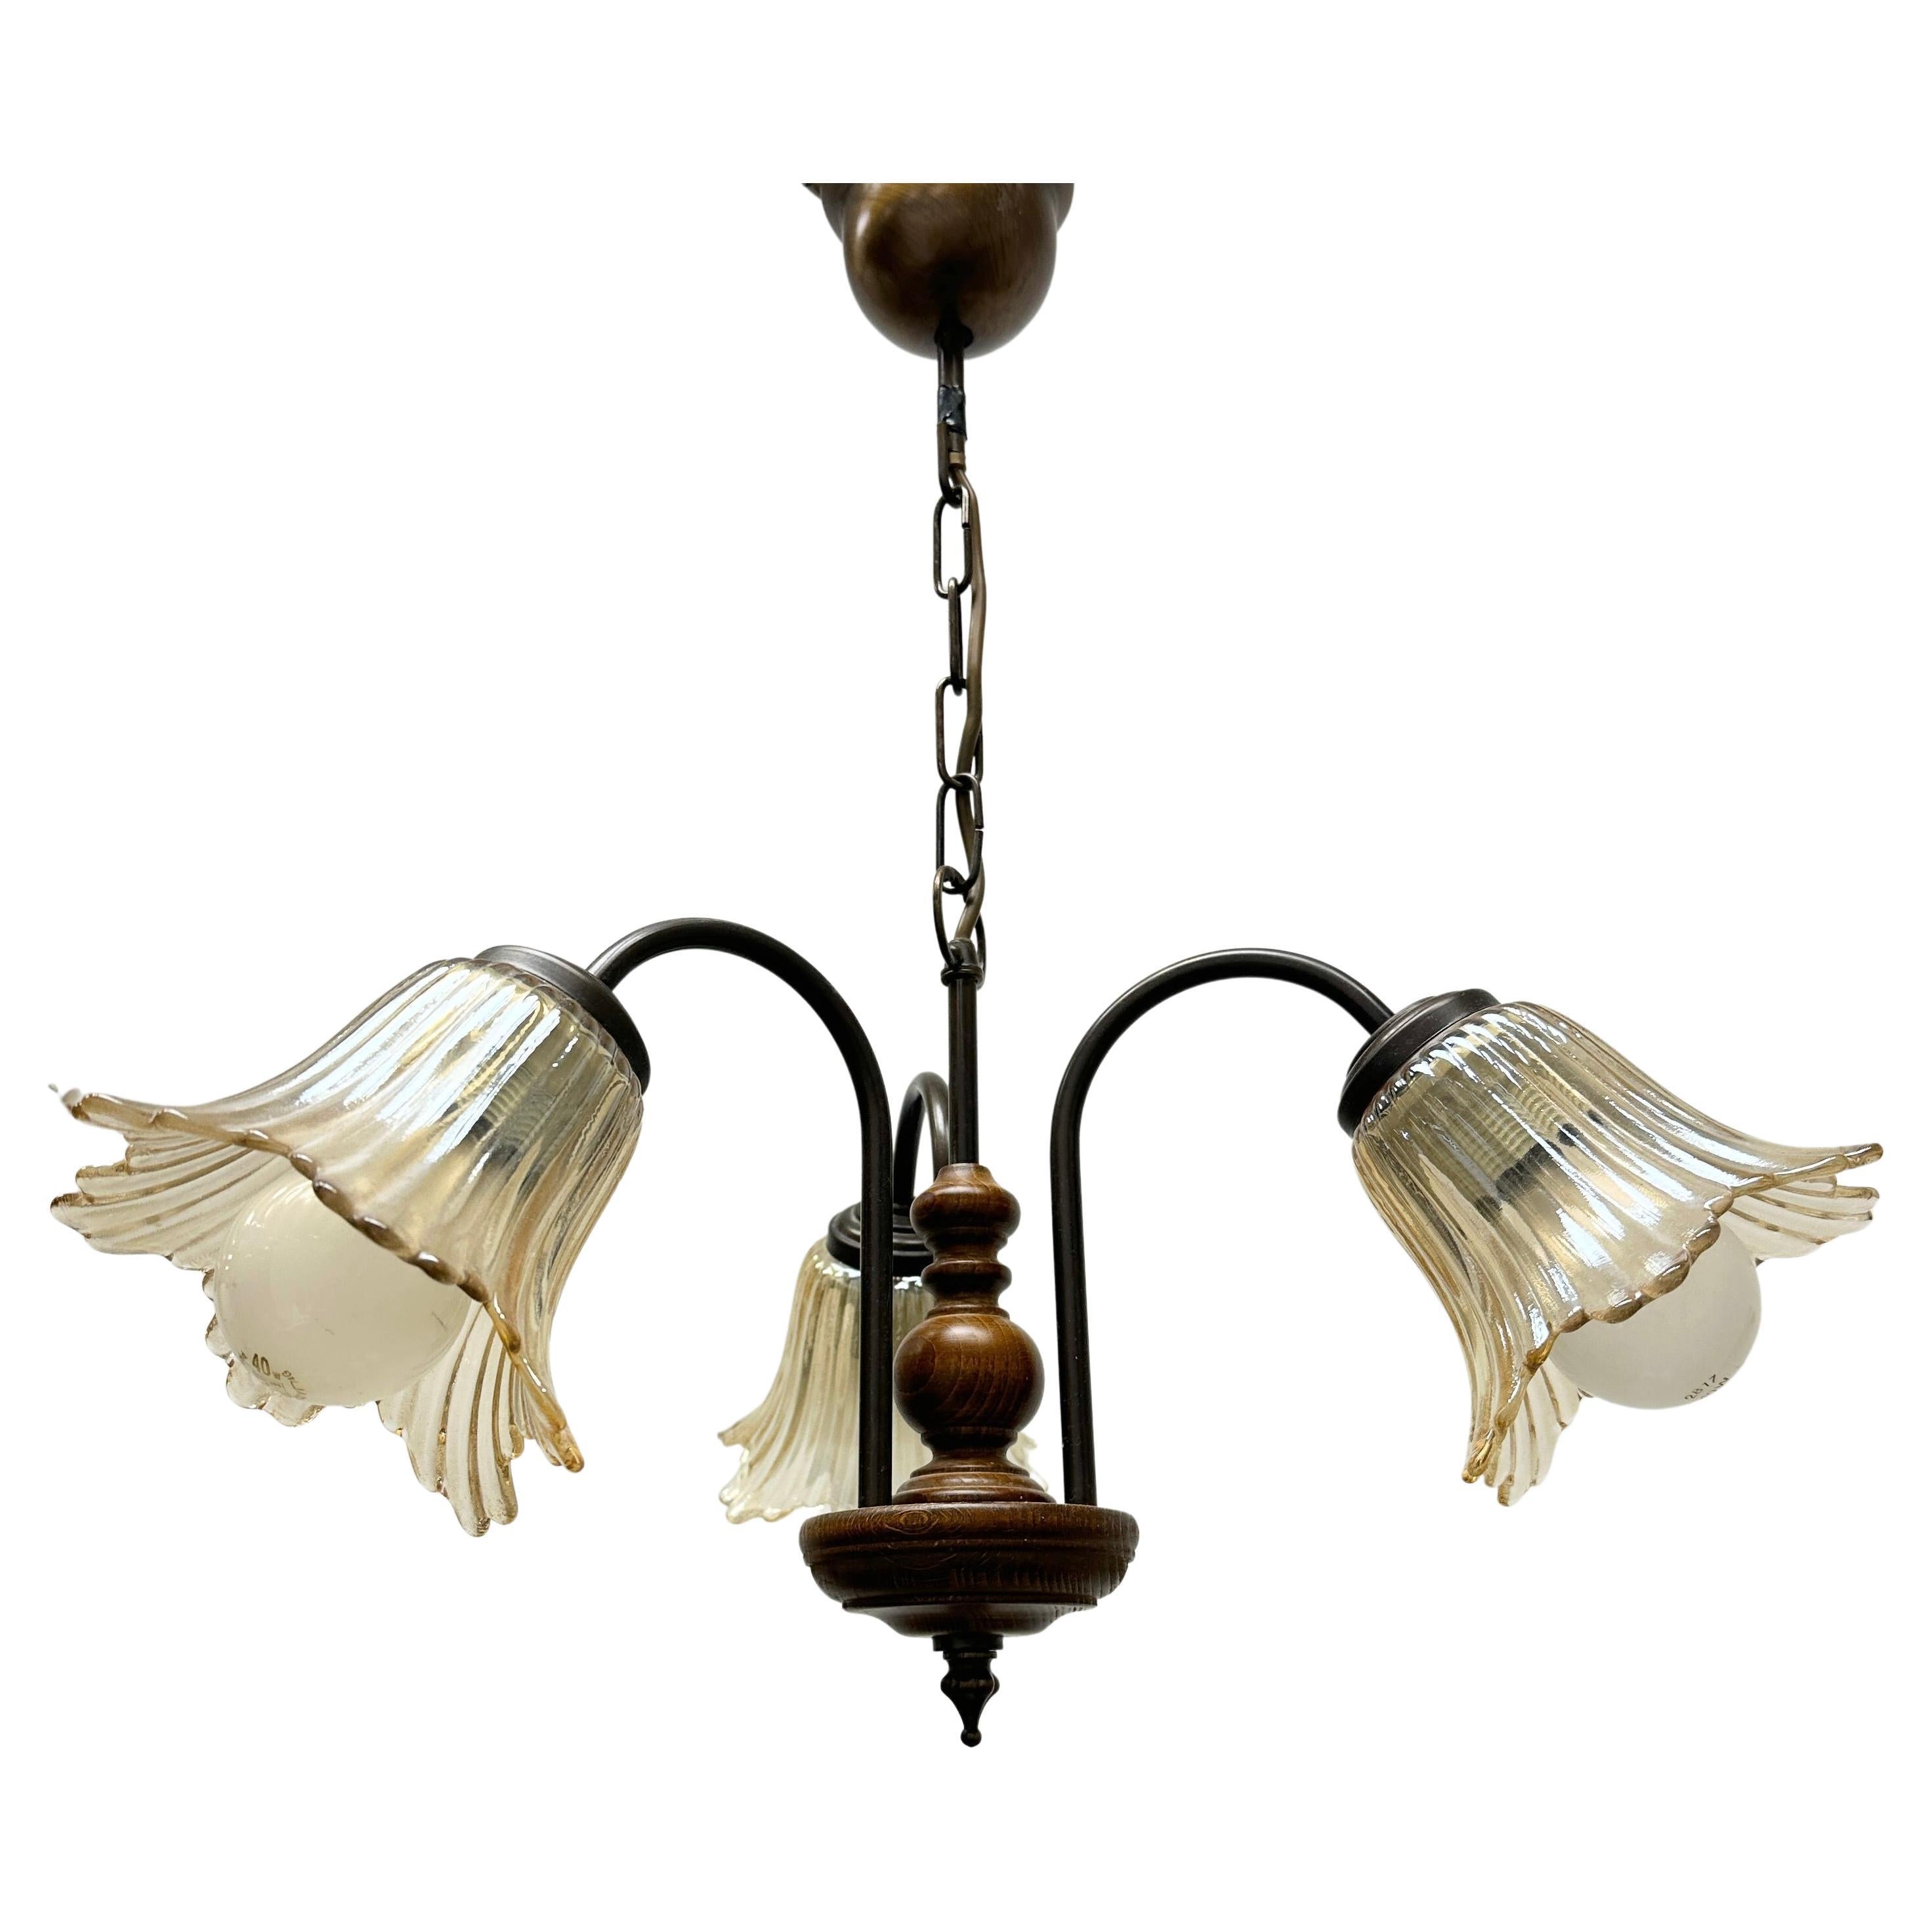 Gorgeous German Tole Wood Metal Glas Shade Three Light Chandelier, 1970s For Sale